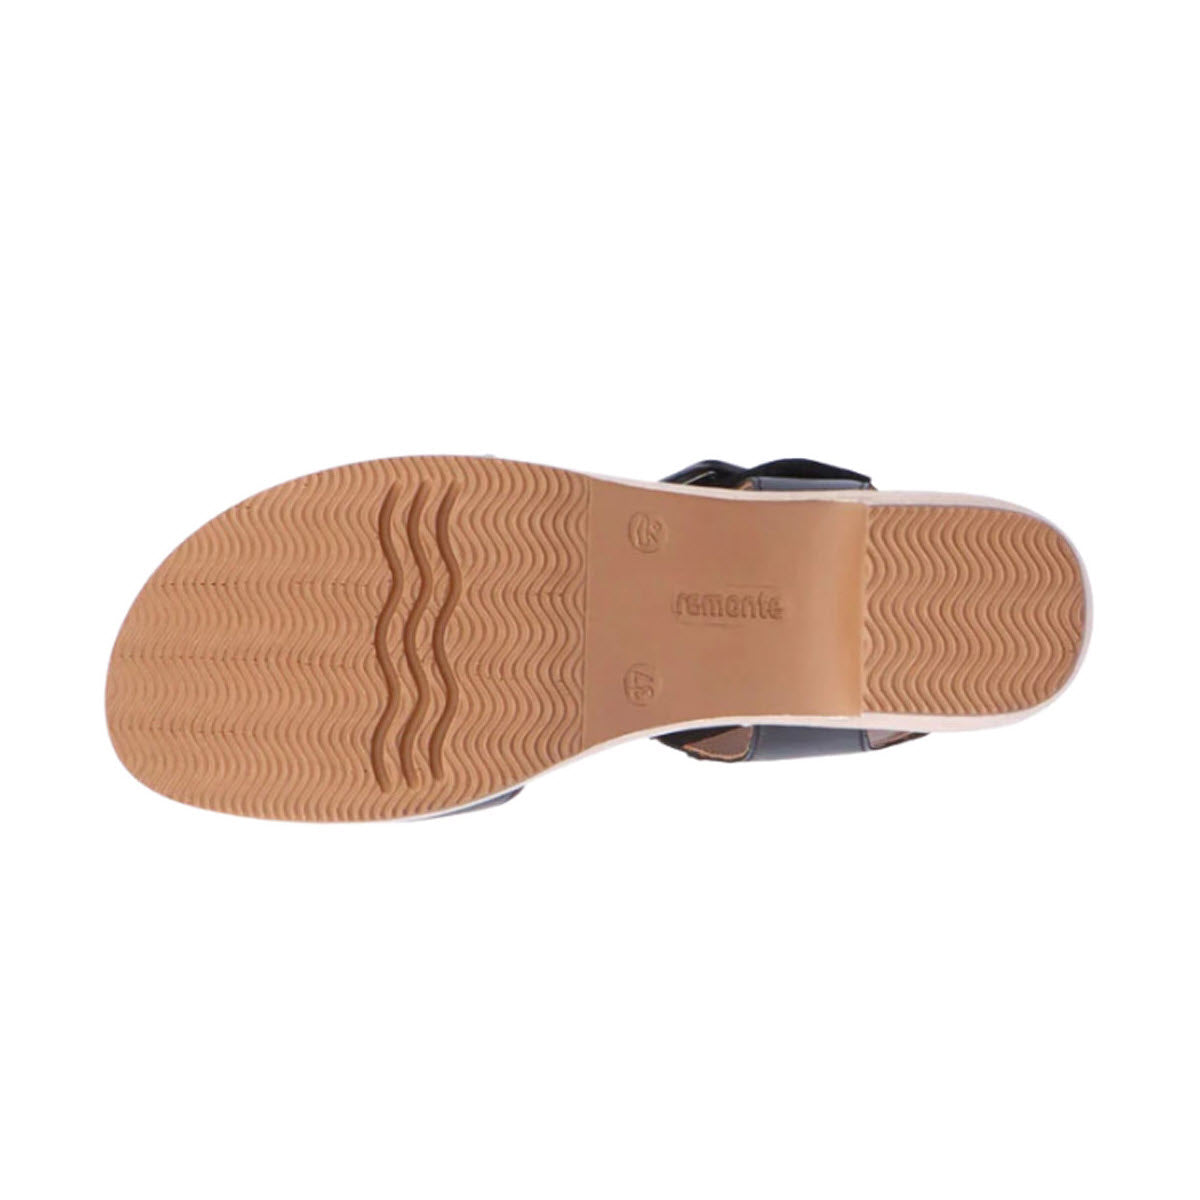 Bottom view of a Remonte heeled sandal with a brown sole featuring a wavy tread pattern and embossed &quot;Remonte by Rieker&quot; logos.